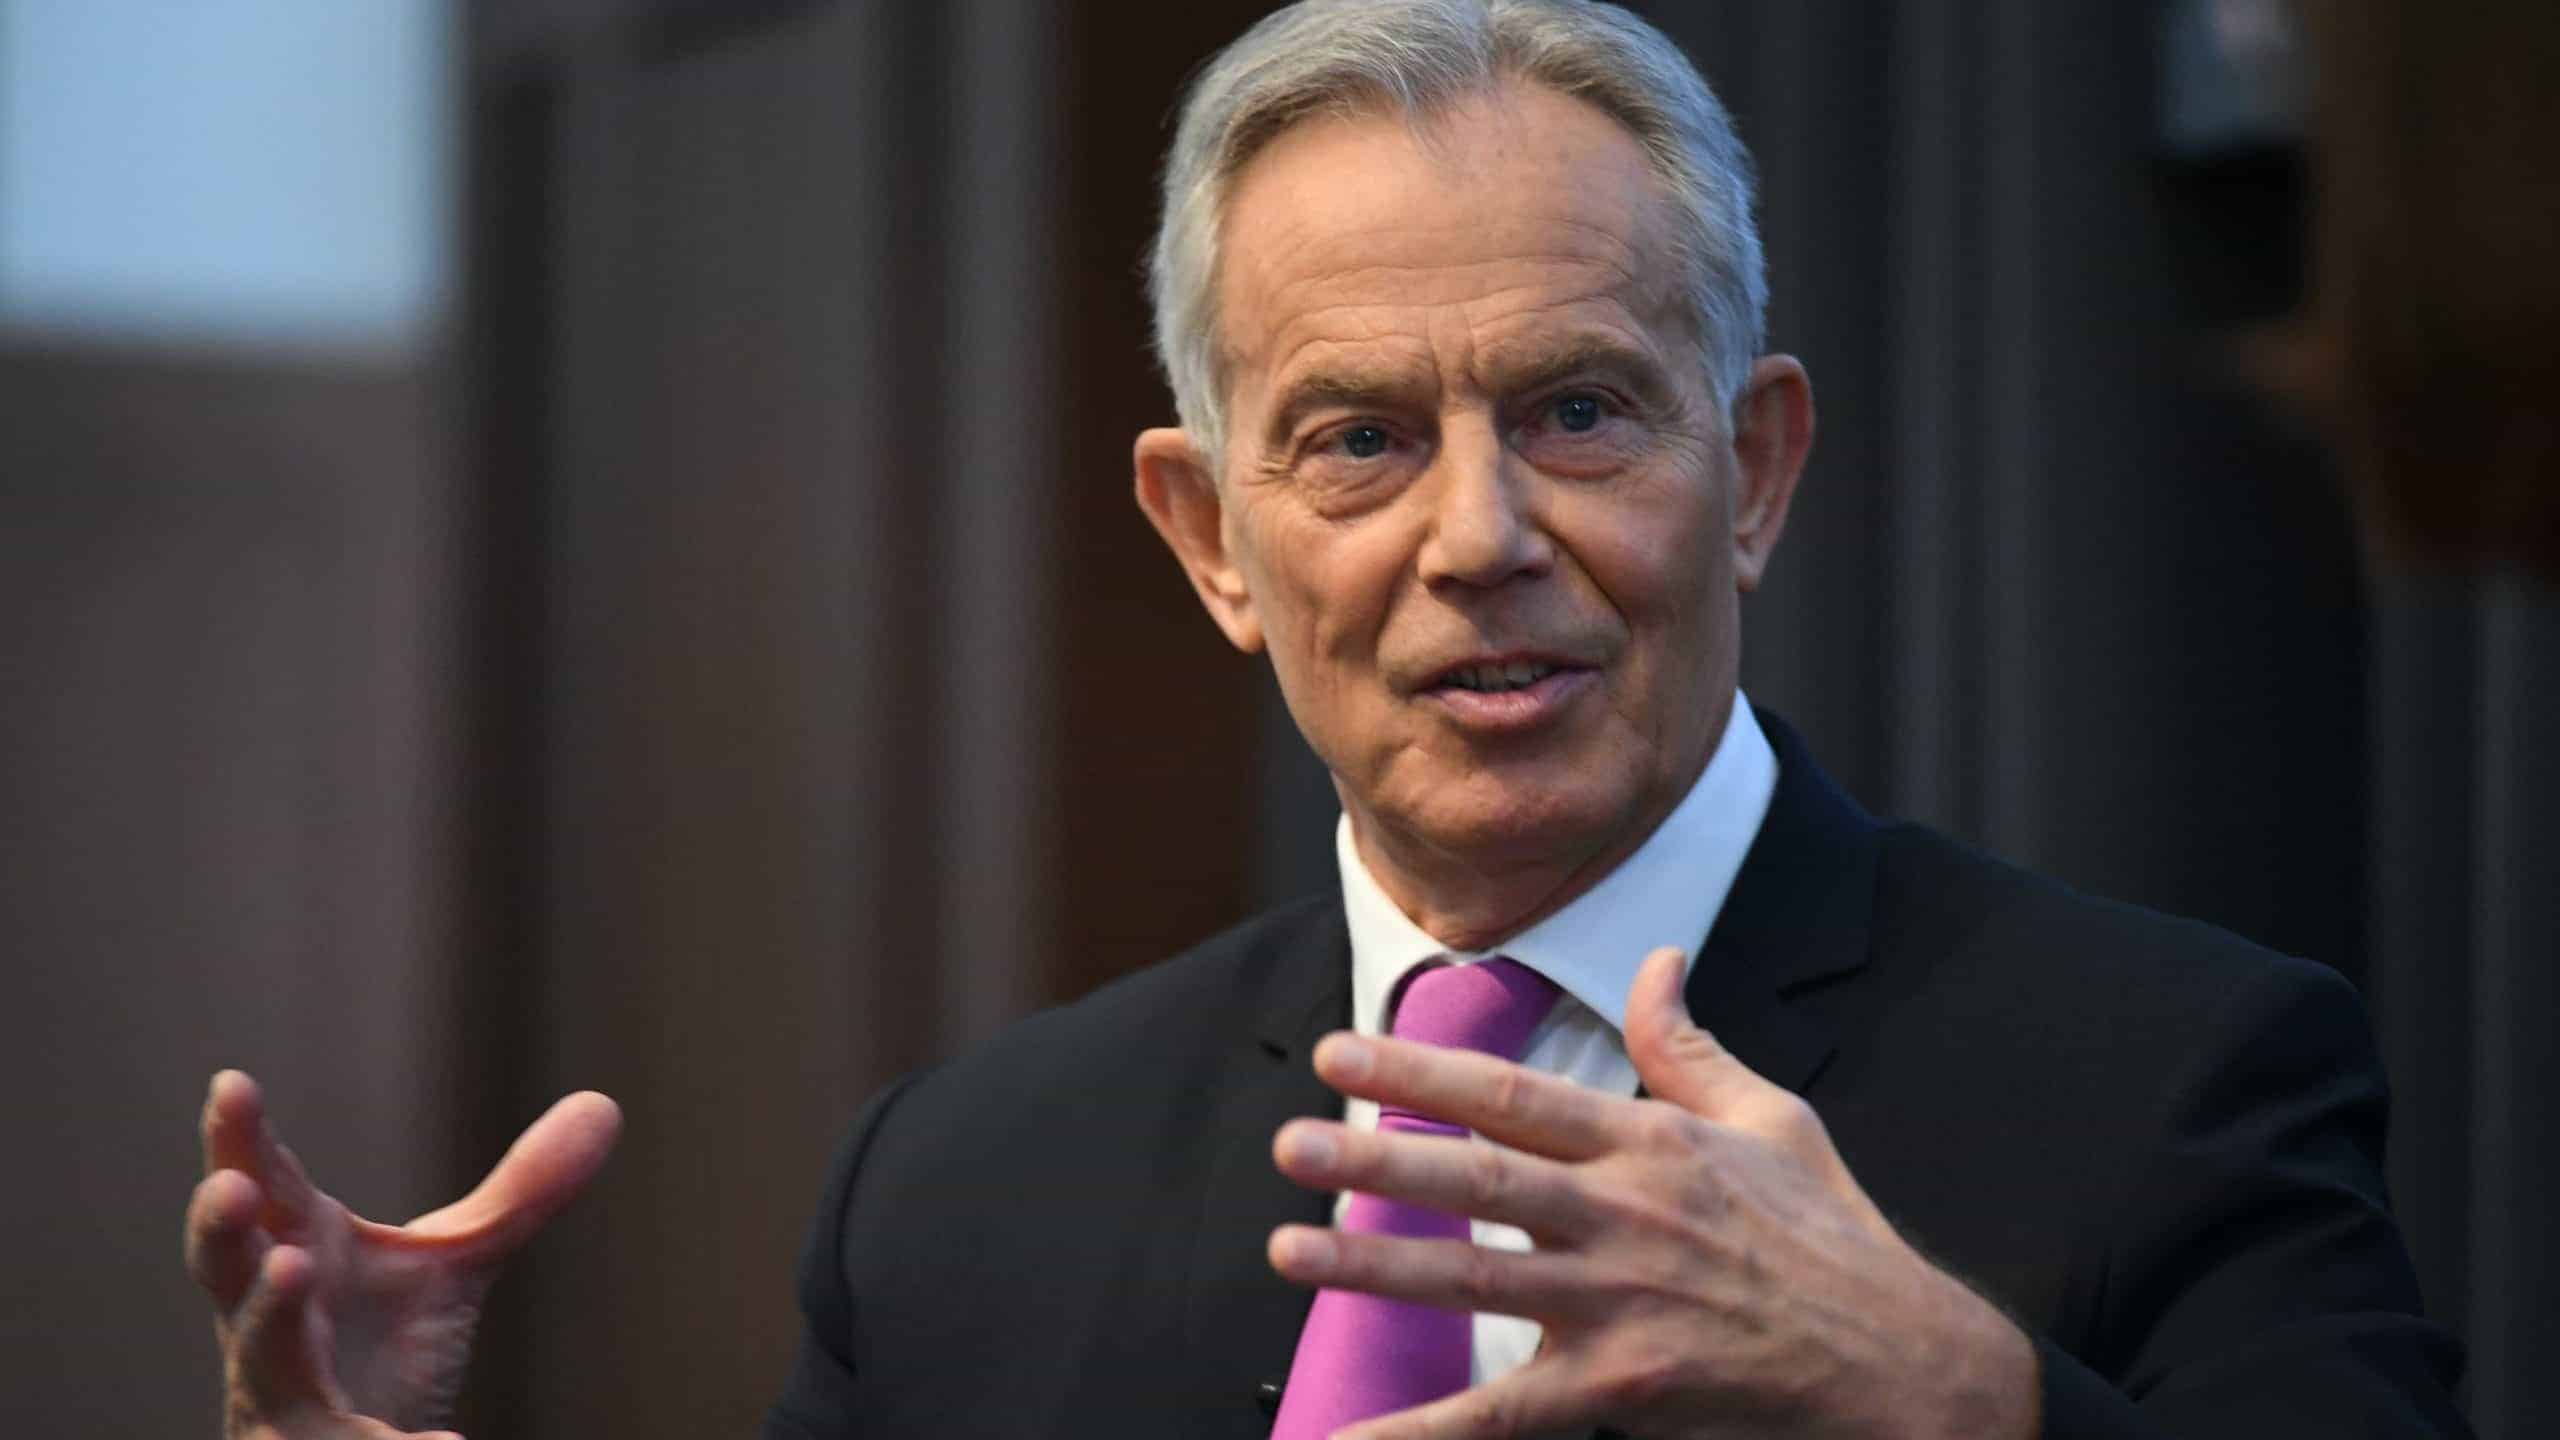 Blair calls for ‘global genomic sequencing’ to spot new variants